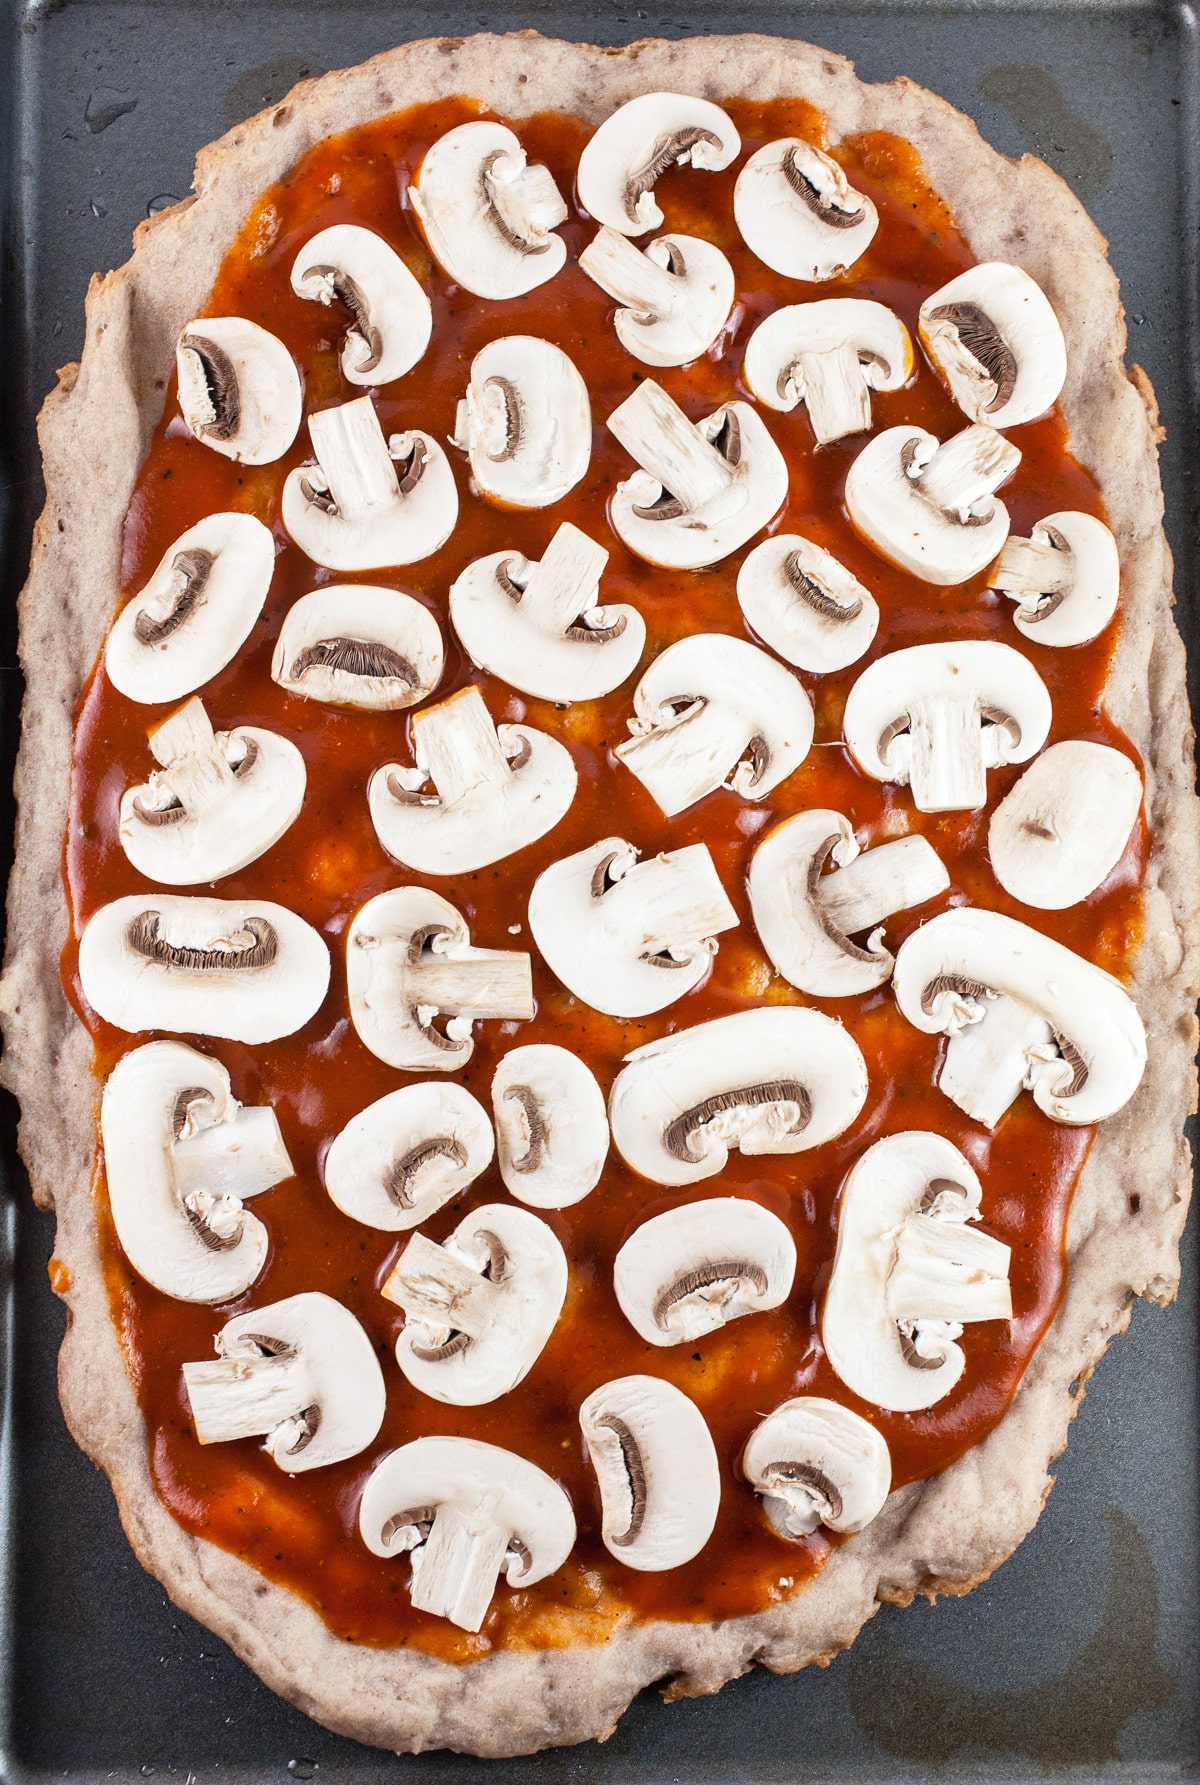 Pizza crust with BBQ sauce and sliced mushrooms on baking sheet.